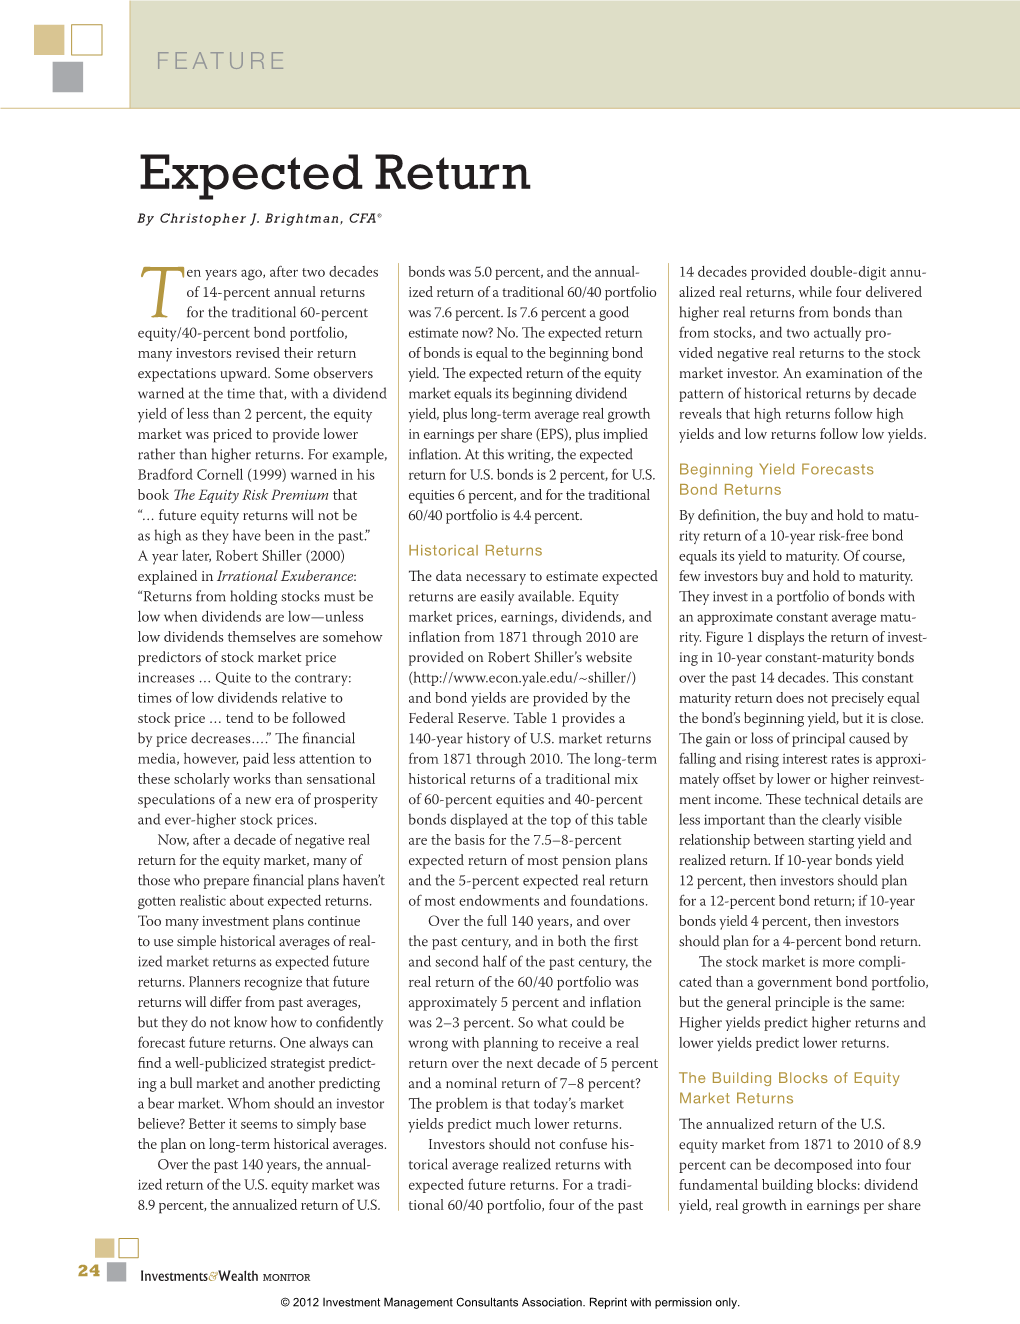 Expected Return by Christopher J